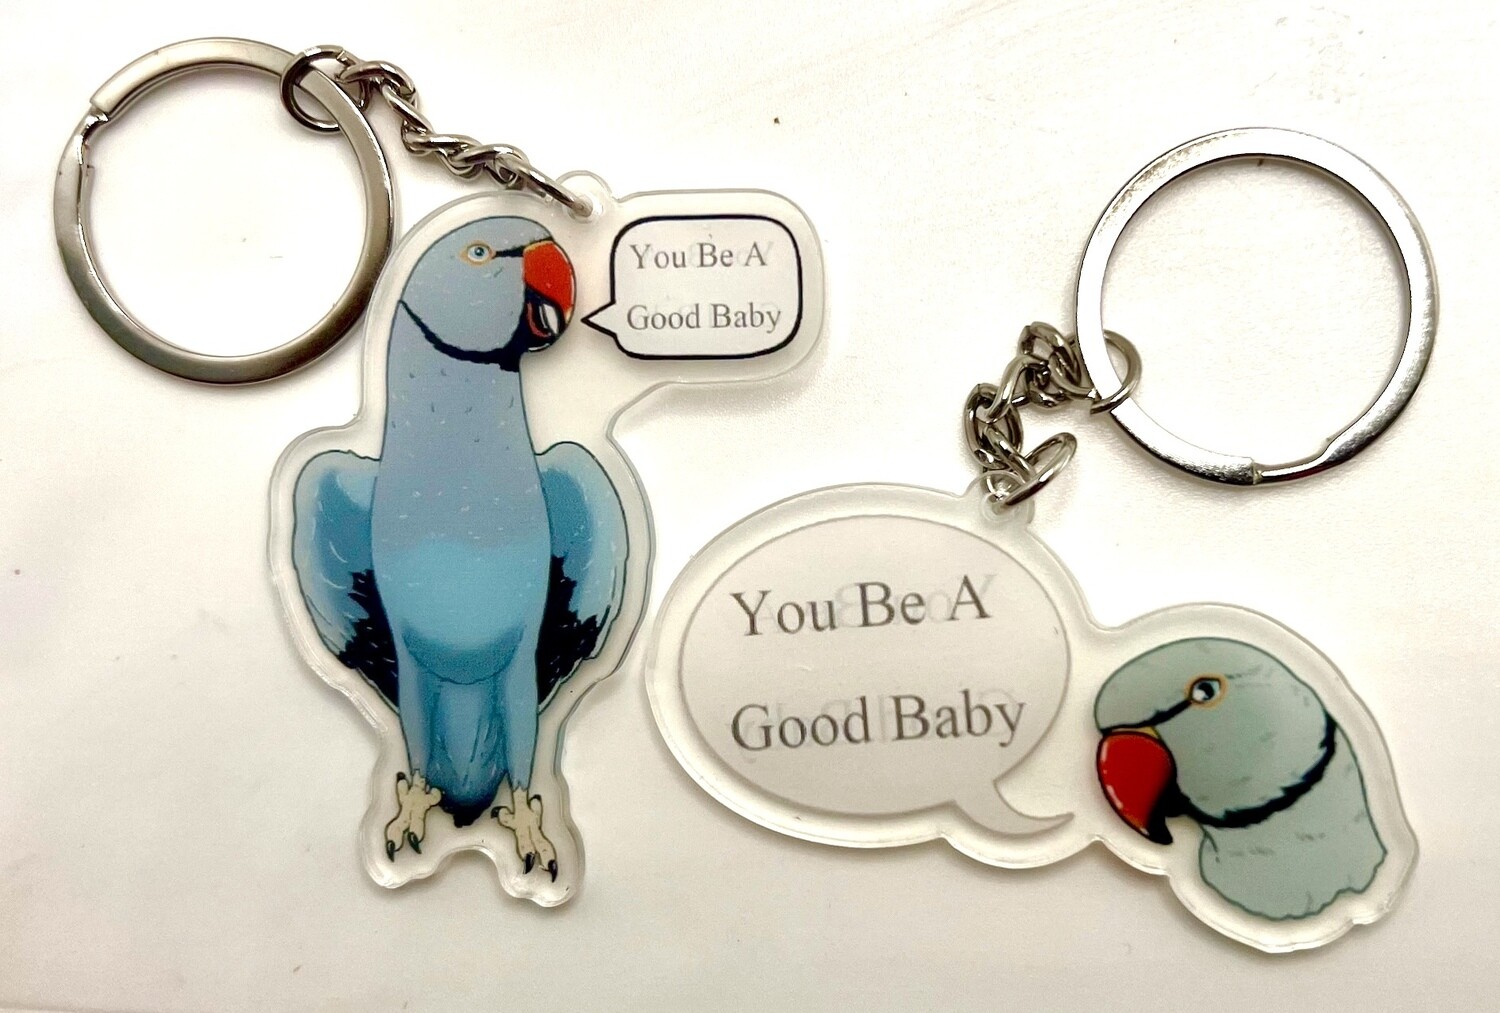 "You Be A Good Baby" Keychain